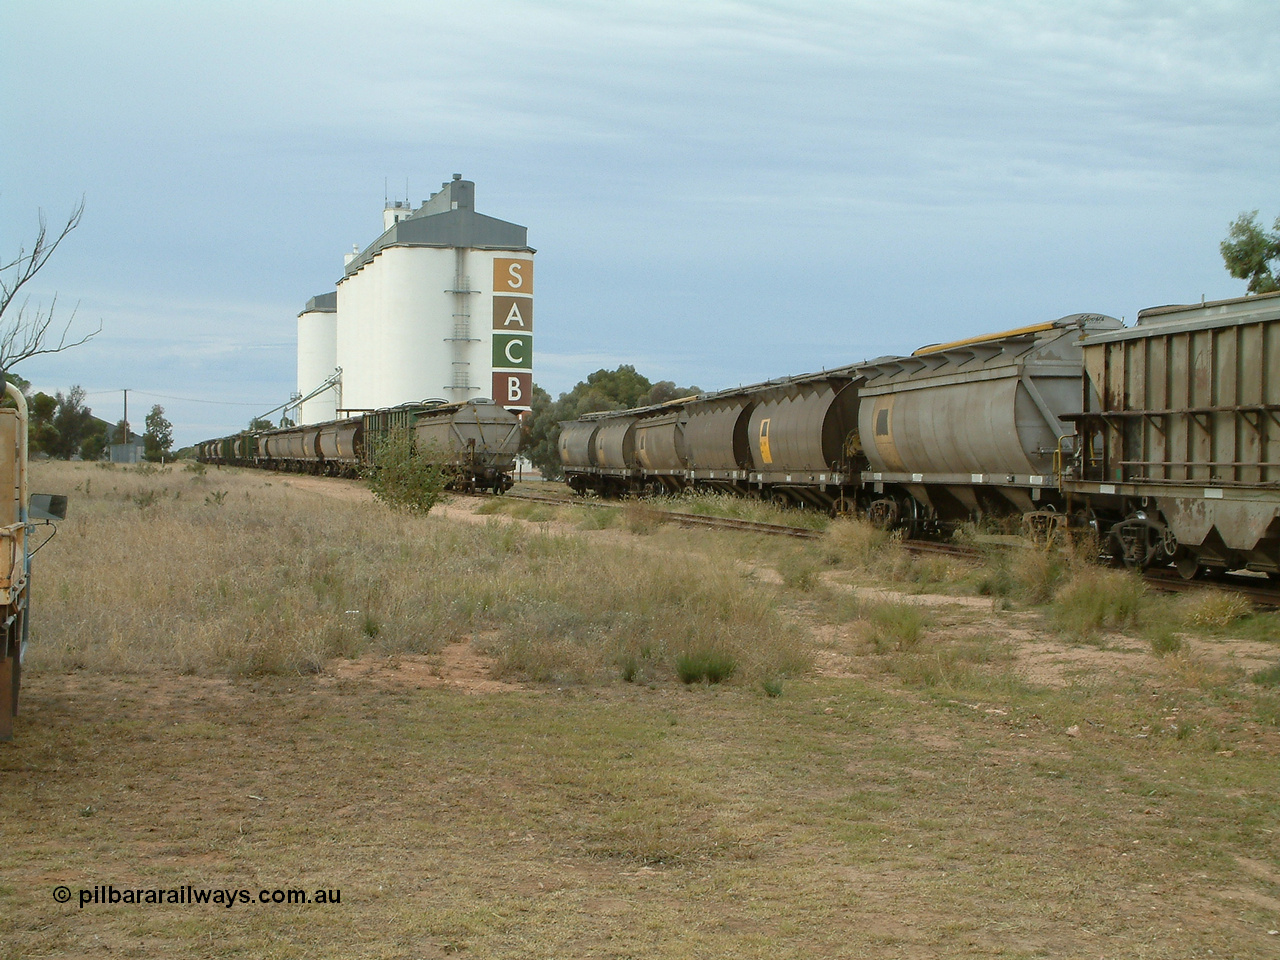 030407 082709
Wudinna, view looking south as the empty rake of bogie grain waggons is shunted into the siding for loading, showing HAN and HCN types of bogie grain hoppers. Concrete SACBH grain complex, horizontal grain bunker can be made out on the left. 7th April 2003.
Keywords: HAN-type;HCN-type;SAR-Islington-WS;Tulloch-Ltd-NSW;